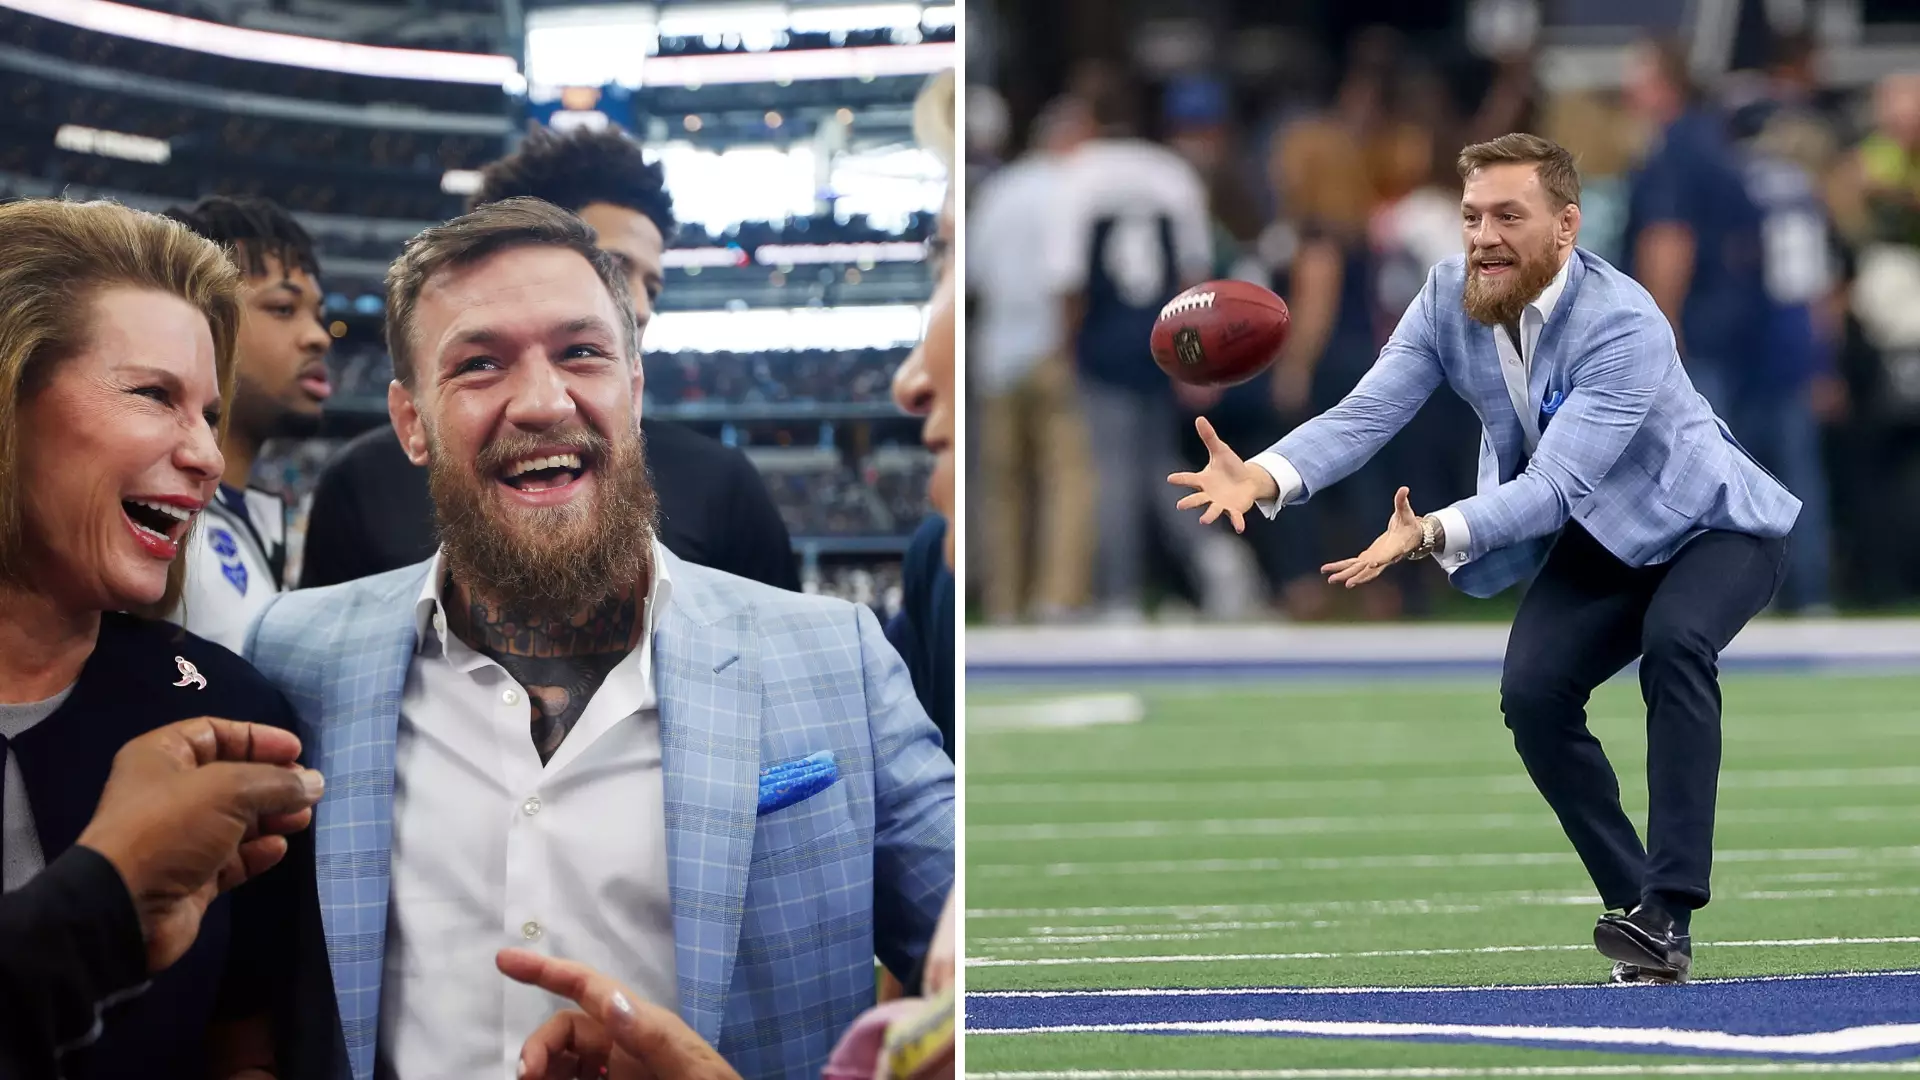 Conor McGregor Lights Up Dallas Cowboys' Match And Players Celebrate With The ‘Billi Strut'